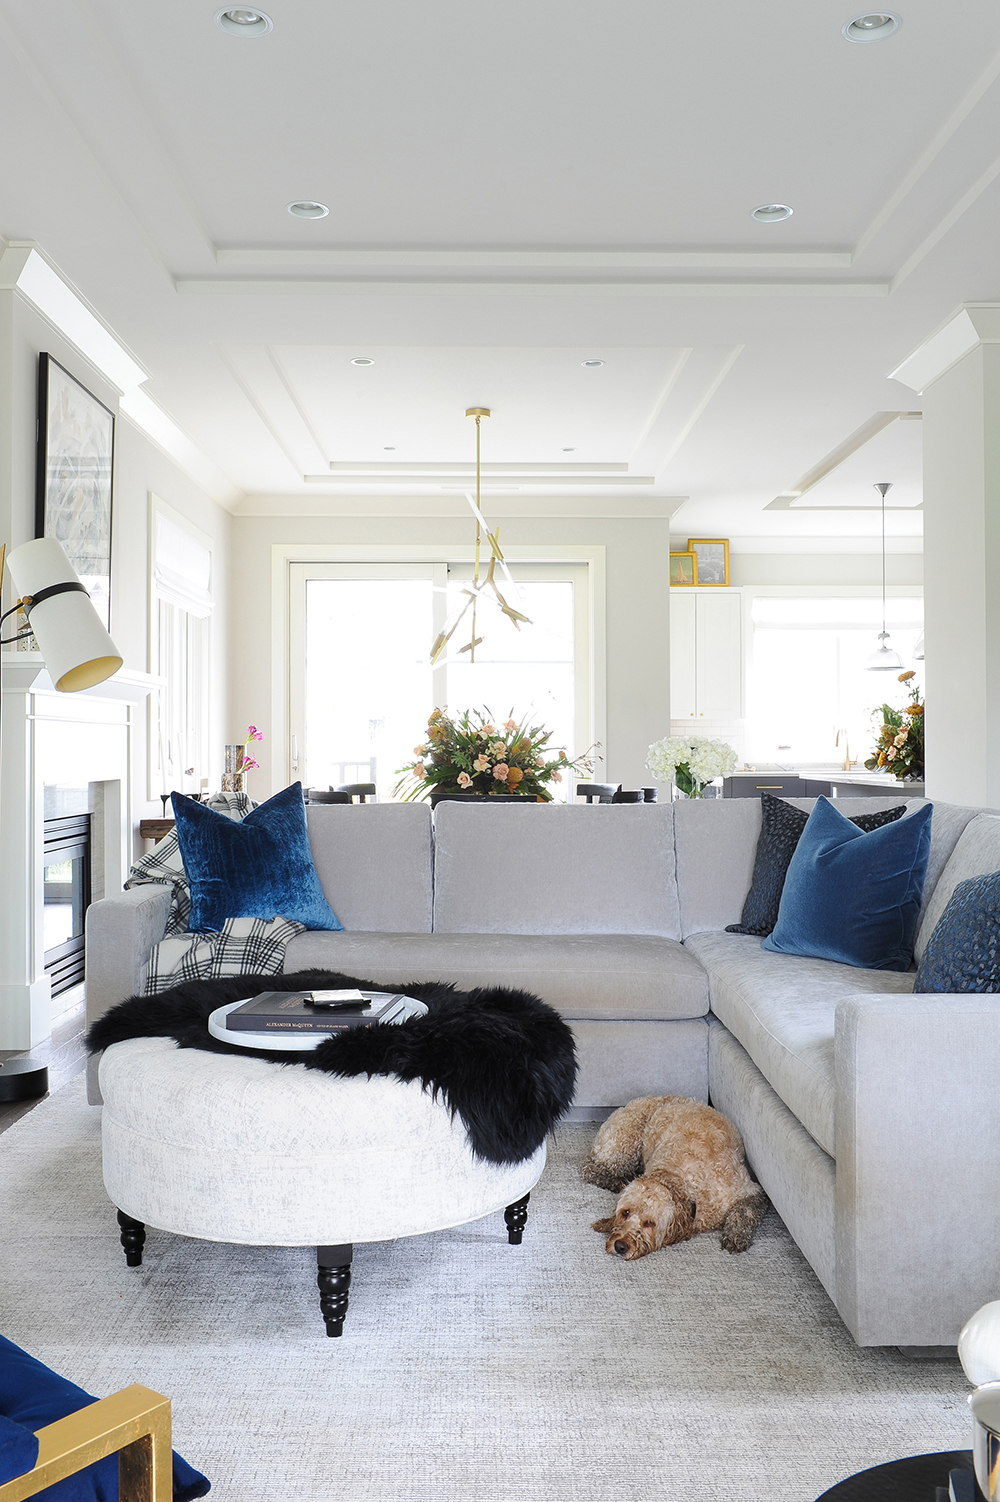 This living room is dressed with custom, comfy pieces to suit all occasions.